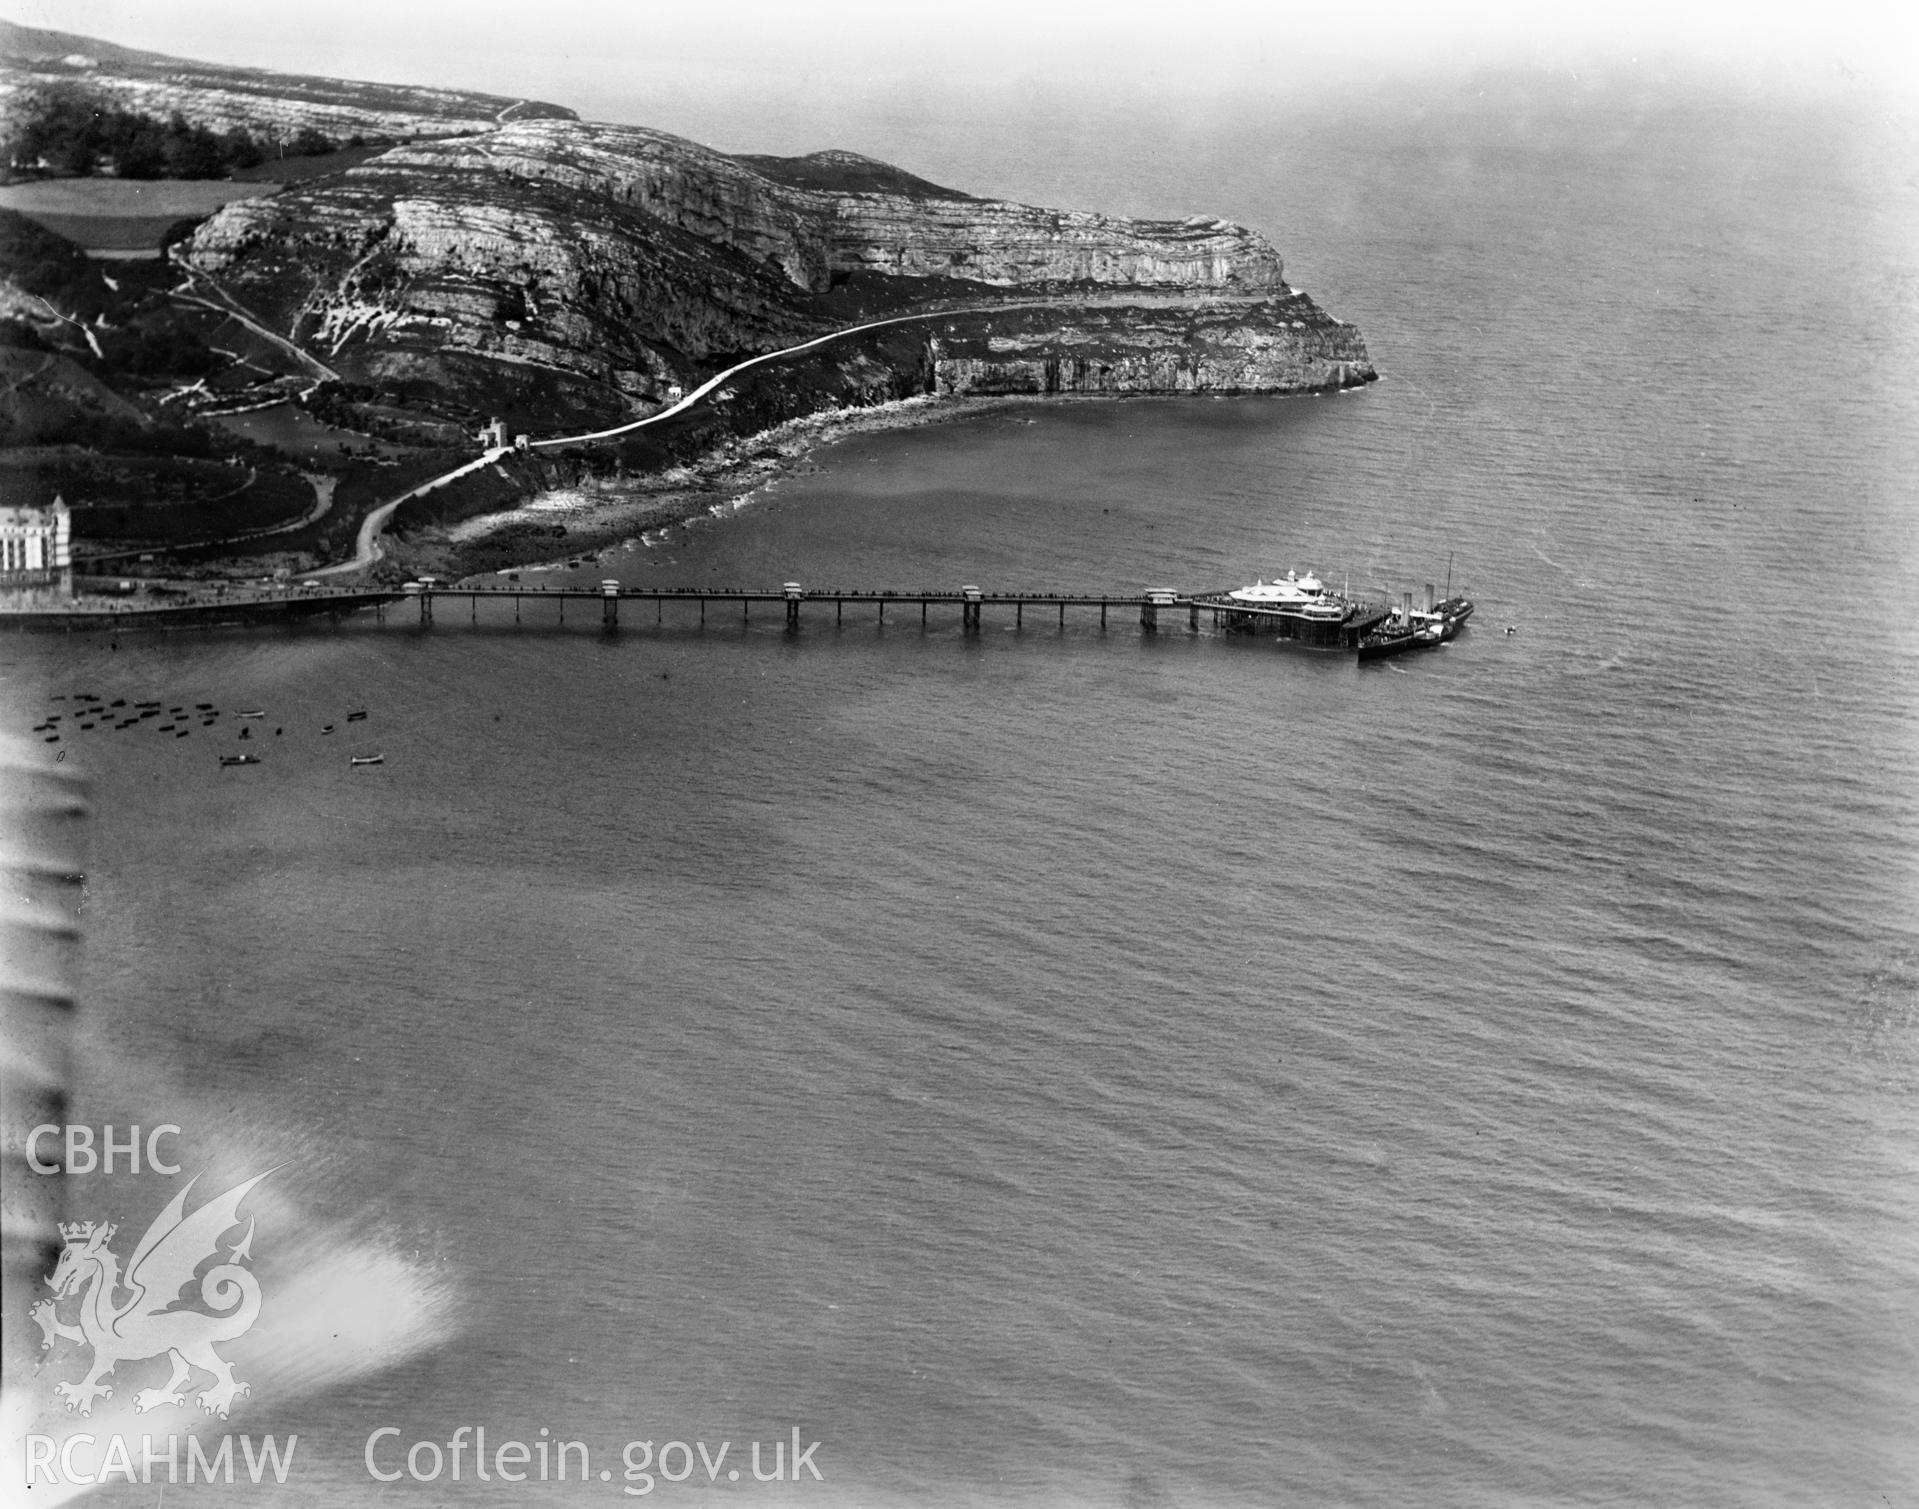 View of Llandudno showing pier and steam paddle ship, oblique aerial view. 5?x4? black and white glass plate negative.